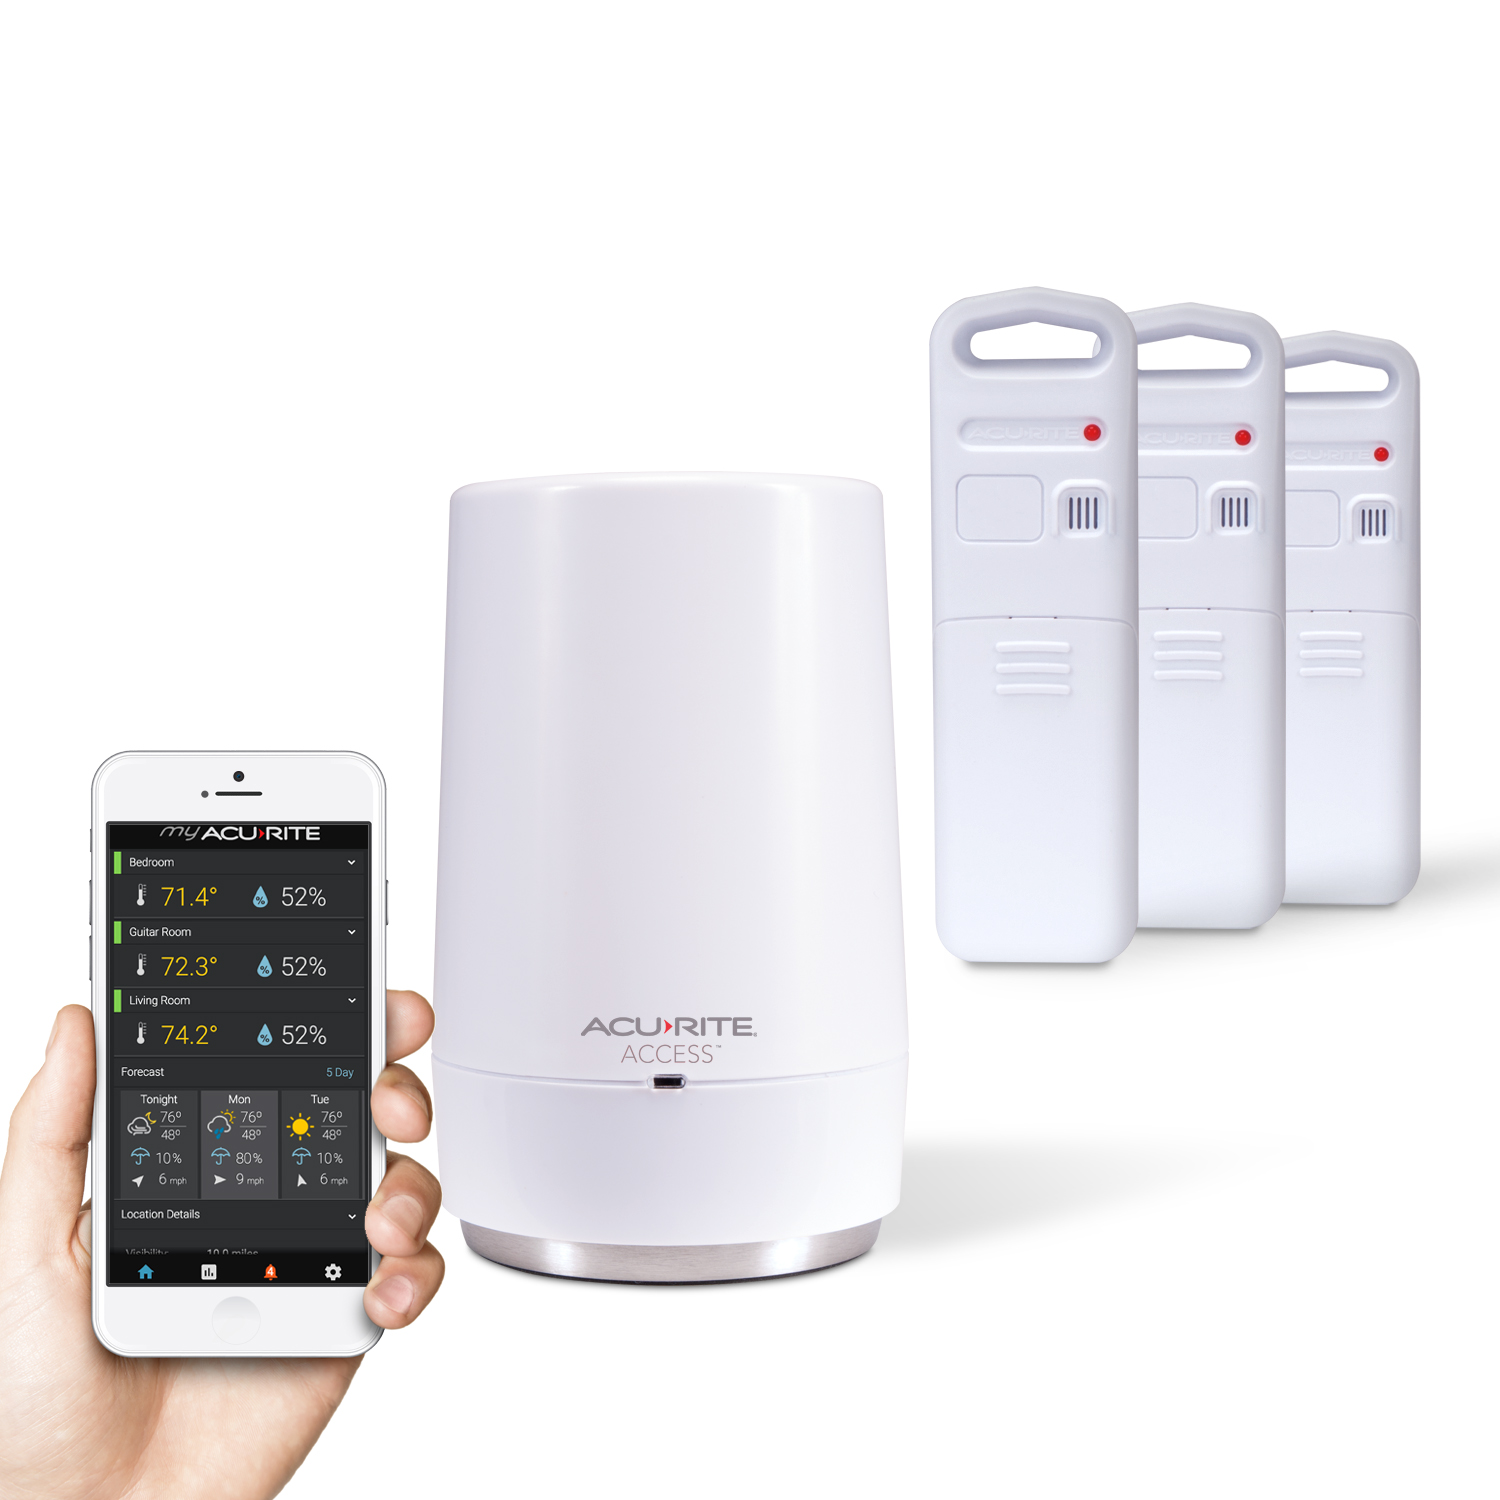 AcuRite home monitoring